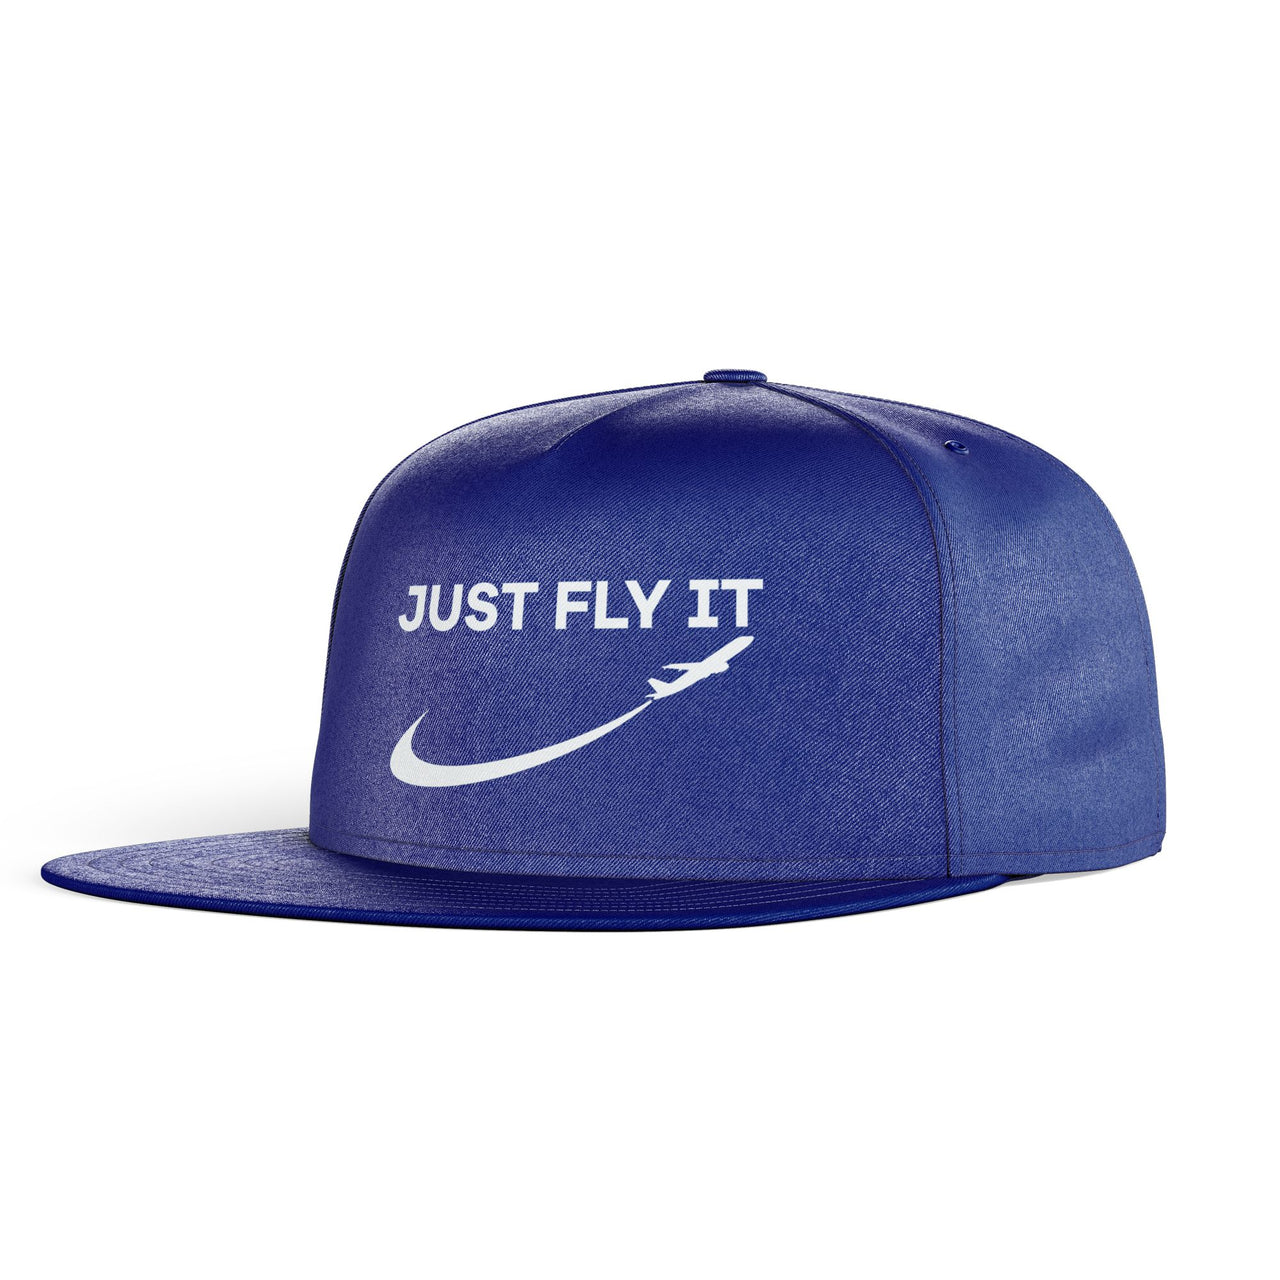 Just Fly It 2 Designed Snapback Caps & Hats